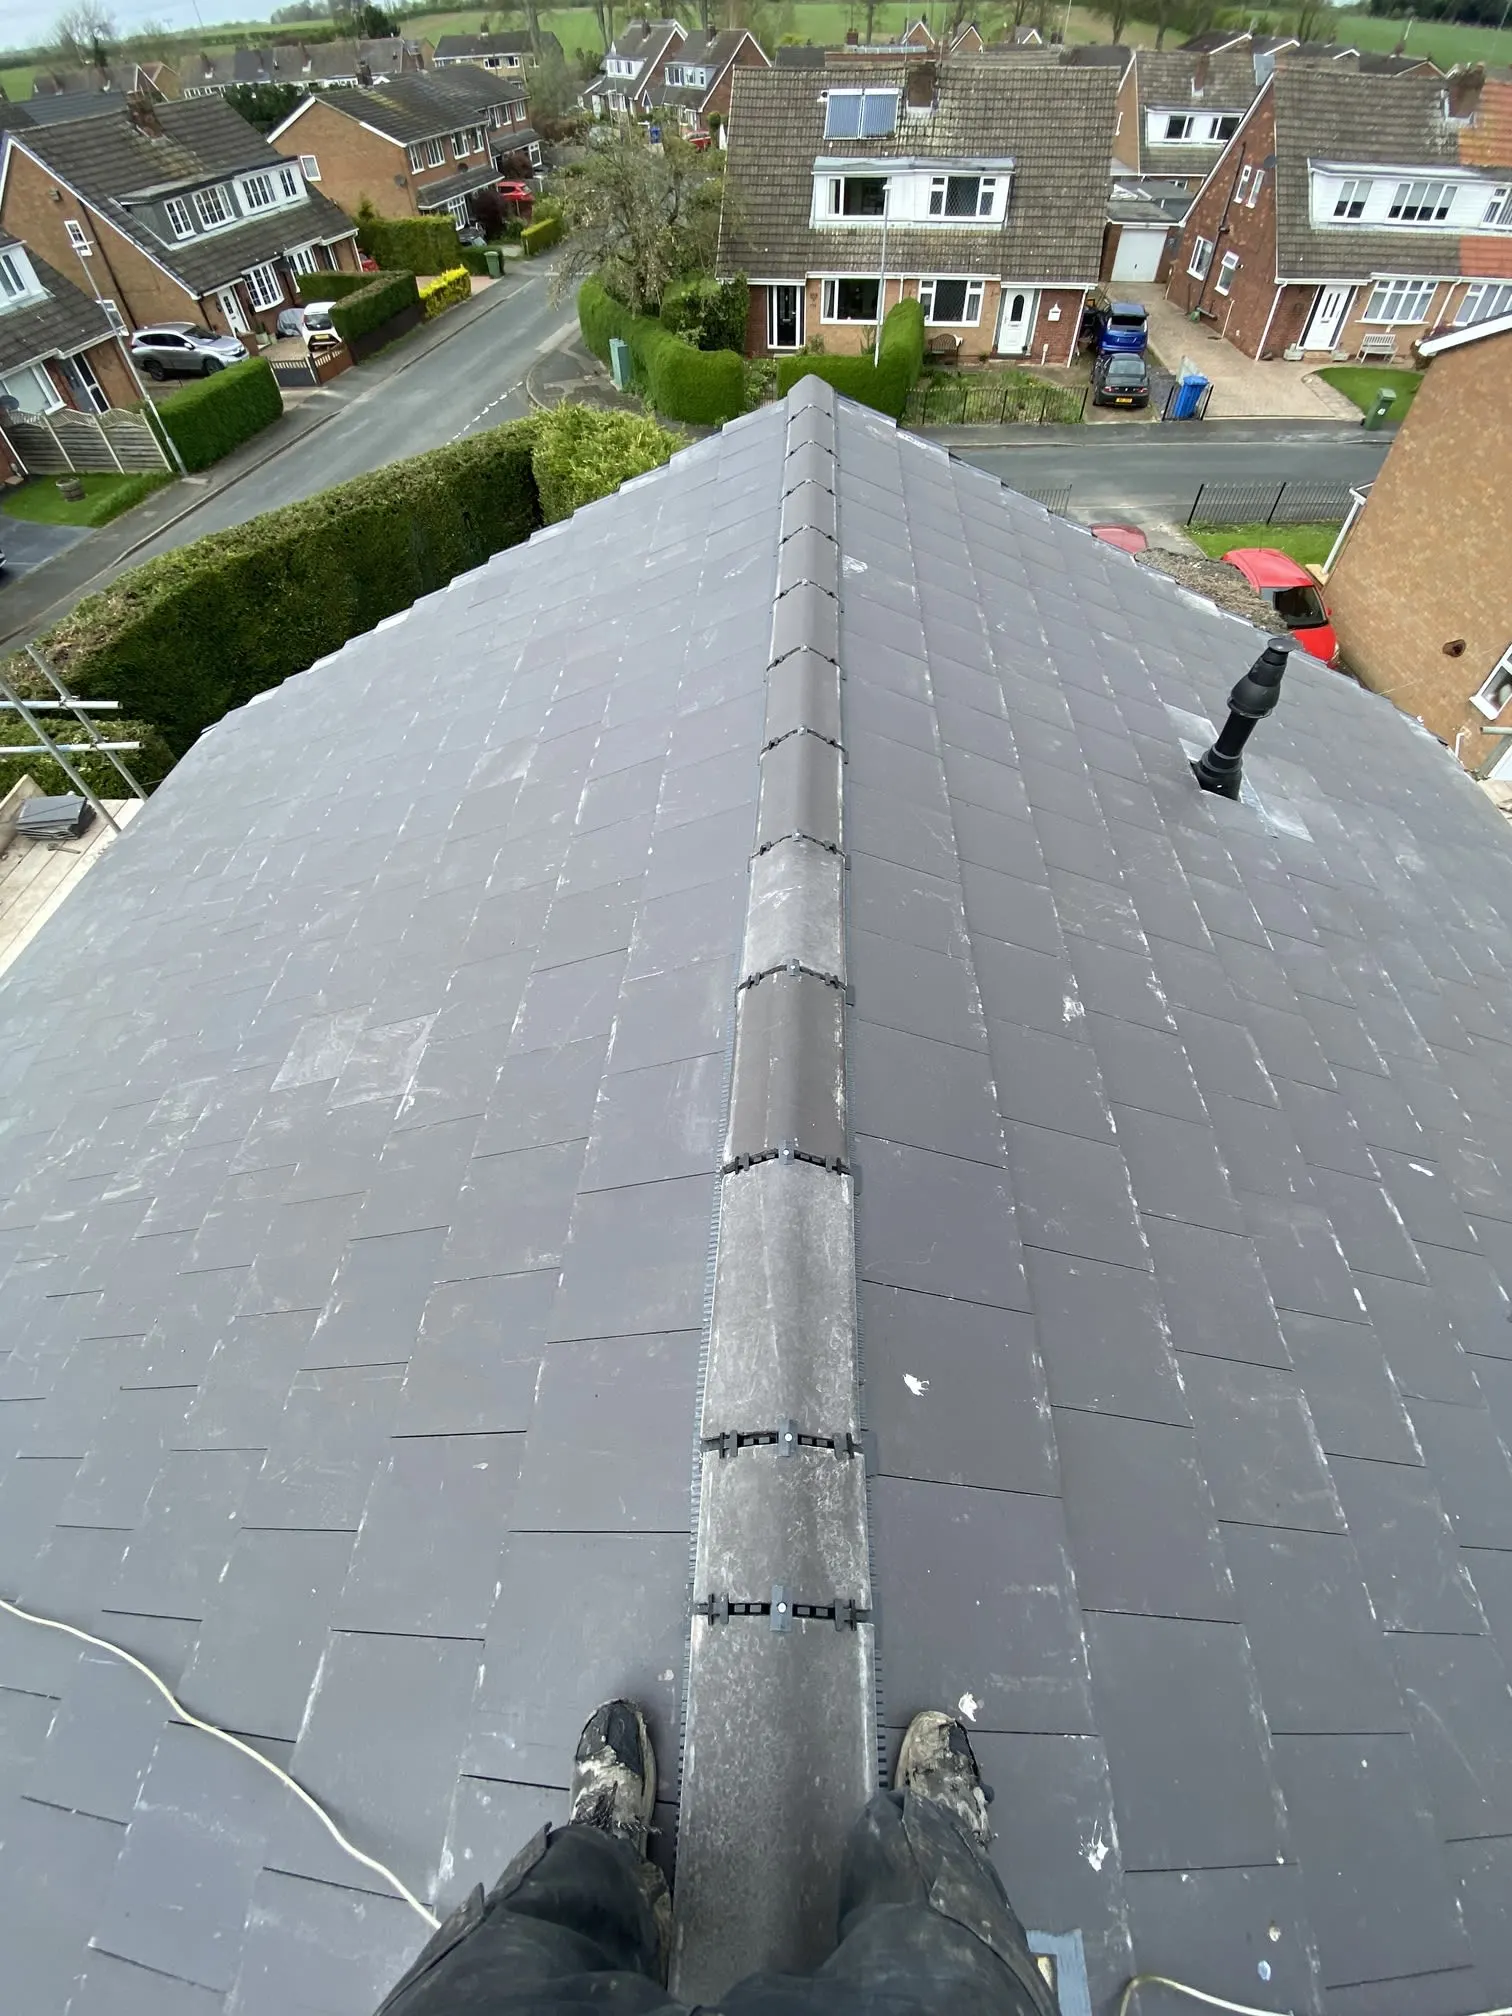 J&B Roofing Specialists Cottingham 07375 366681